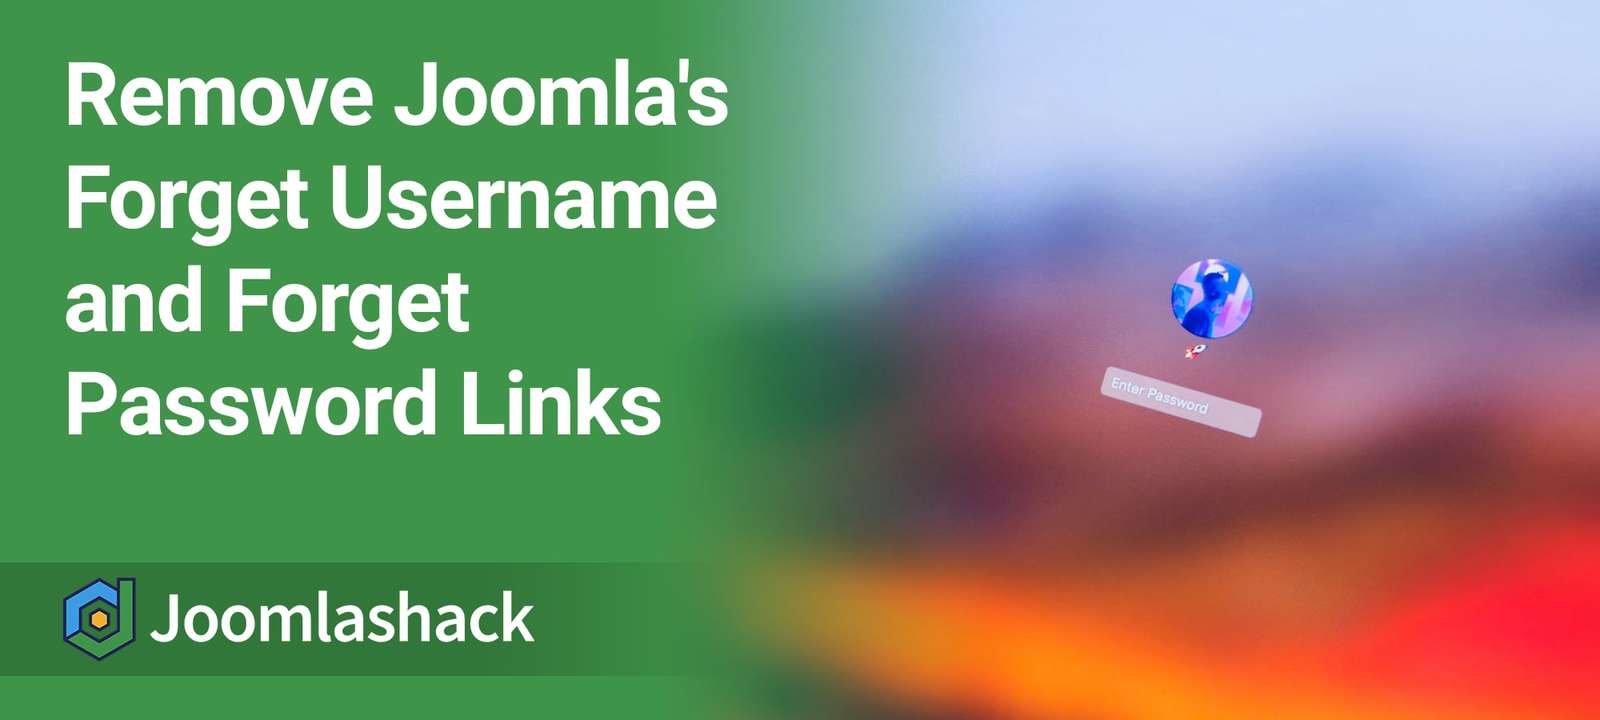 Remove Joomla's Forget Username and Forget Password Links